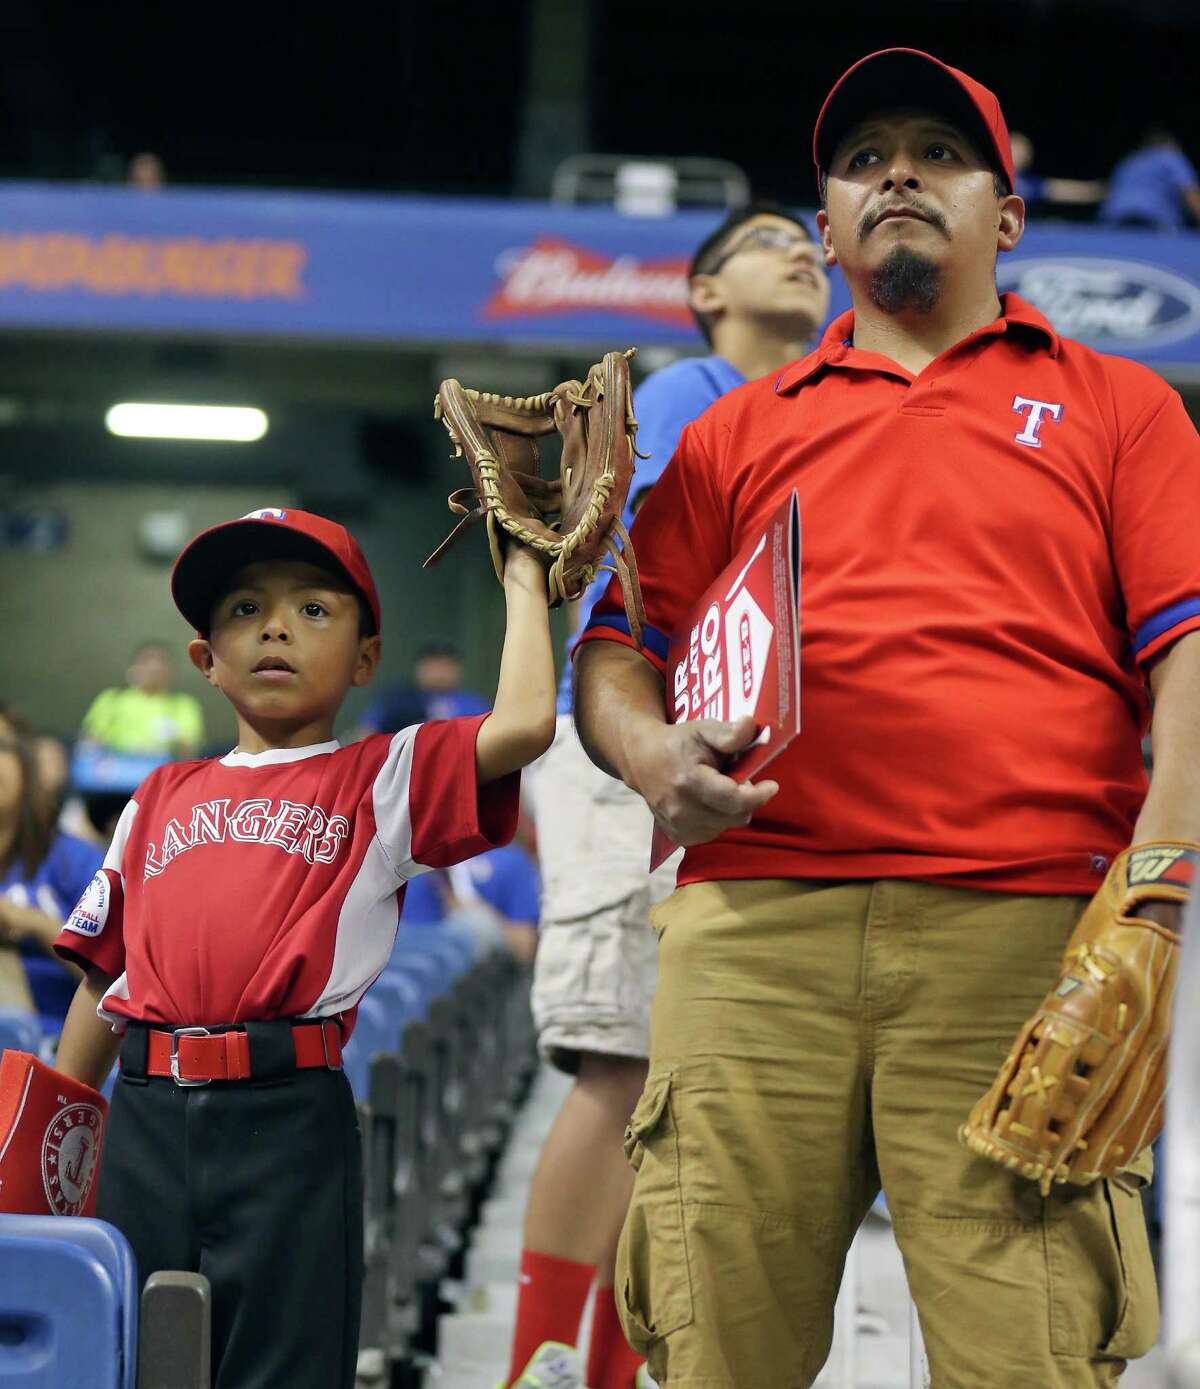 Texas Rangers fans Alfonso Olvera Jr, 7, (left) and his dad Alfonso Olvera watch batting practice before the Rangers and Kansas City Royals Big League Weekend spring exhibition baseball game Friday March 18, 2016 at the Alamodome.